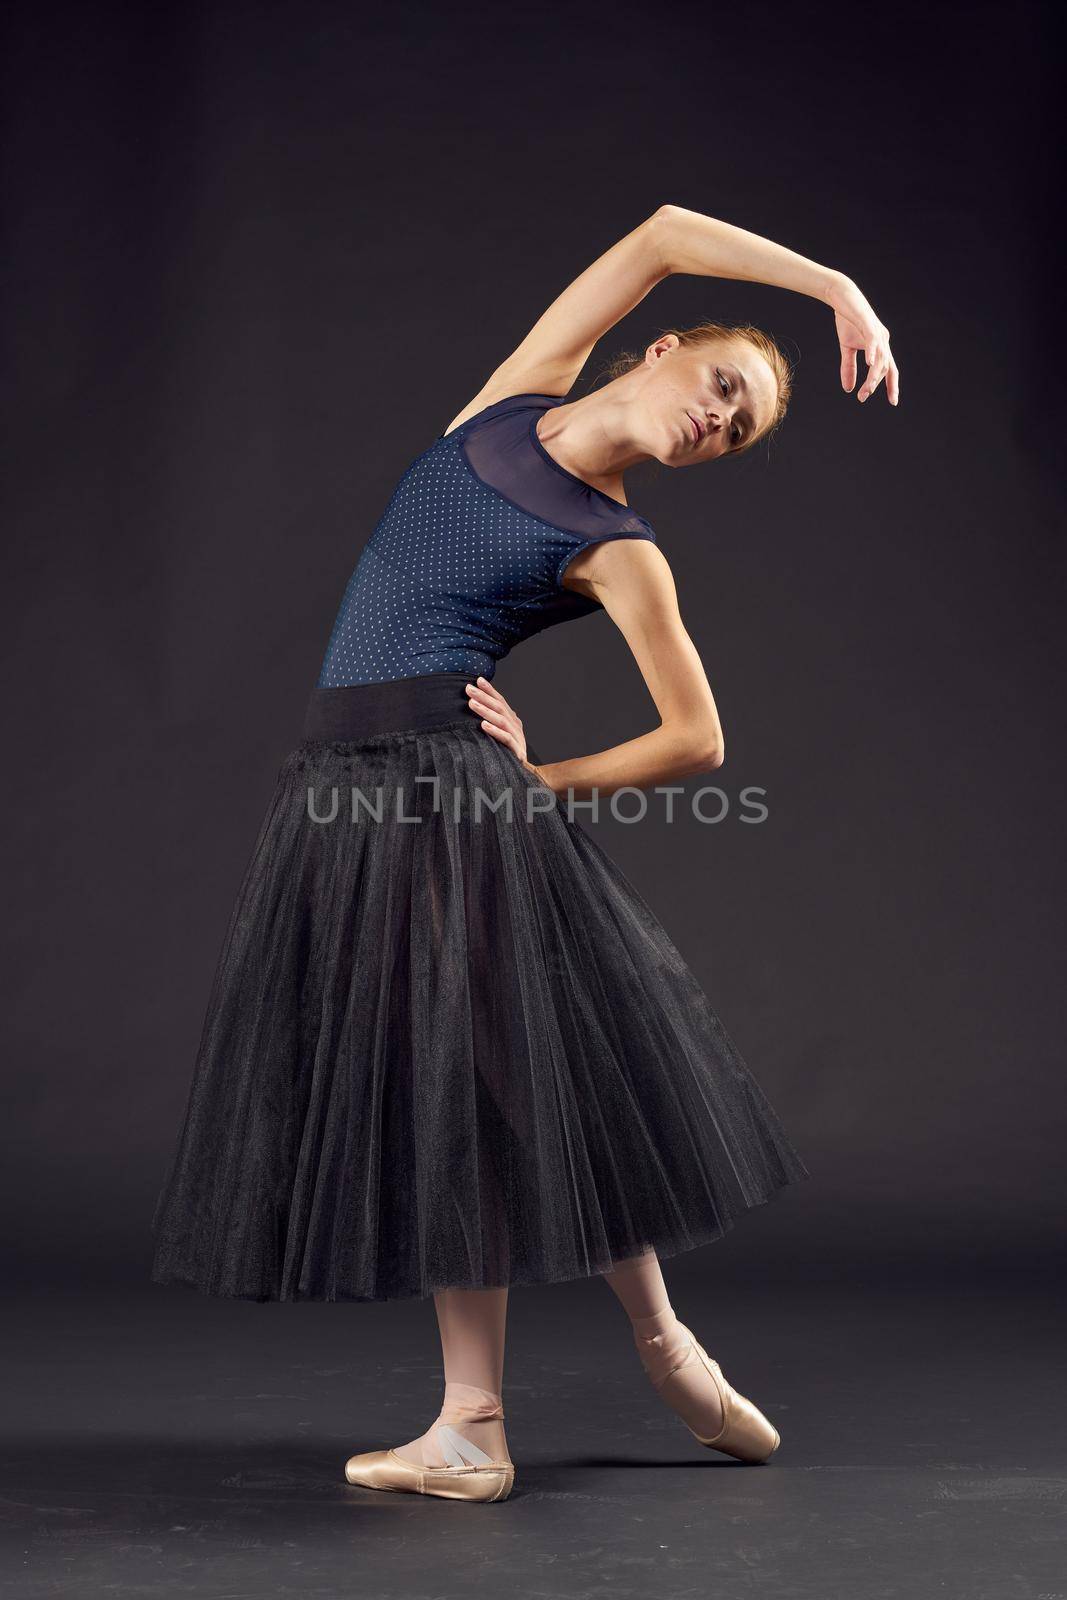 women ballerina in a black dress dance fashion exercise isolated background. High quality photo